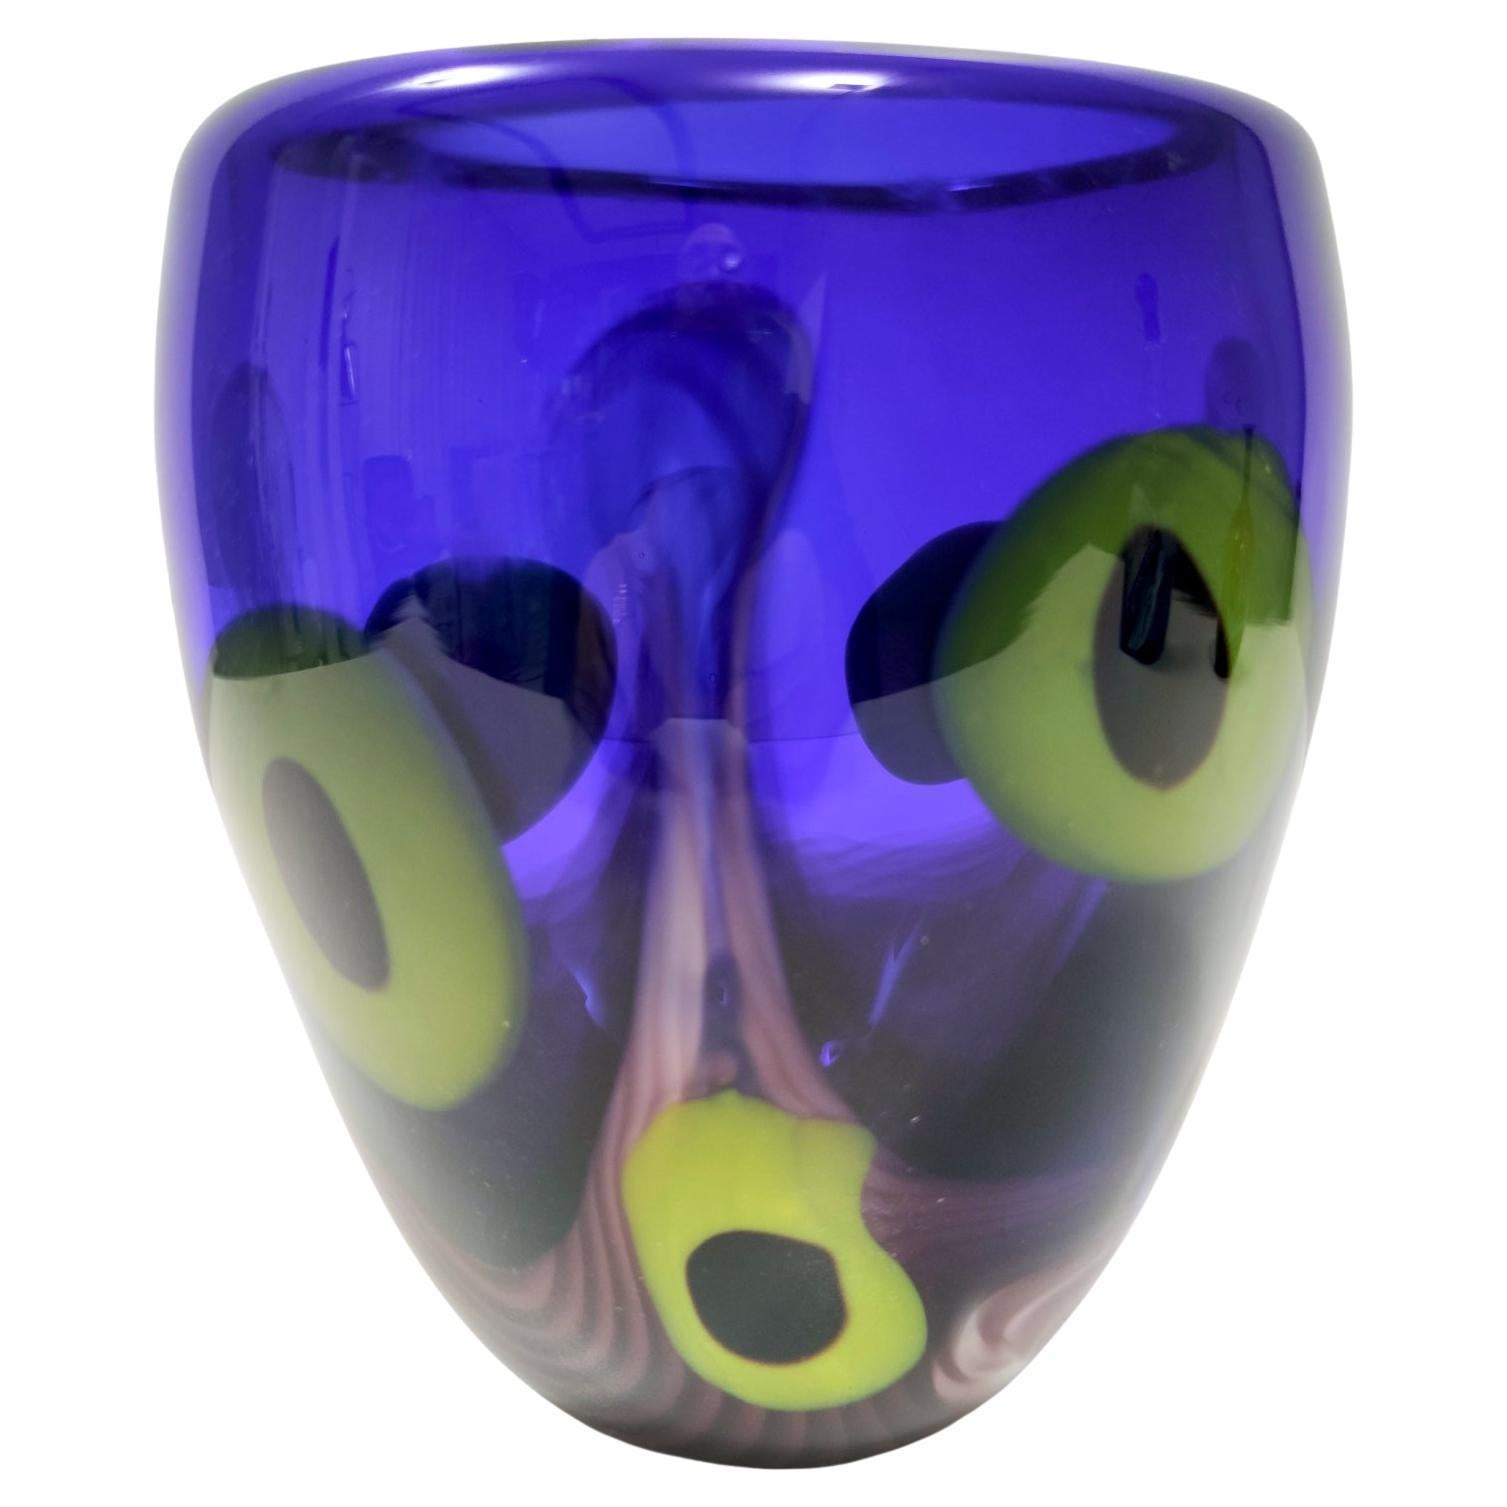 Vintage Blue Murano Glass Vase with Chartreuse and Black Spots, Italy 1980s